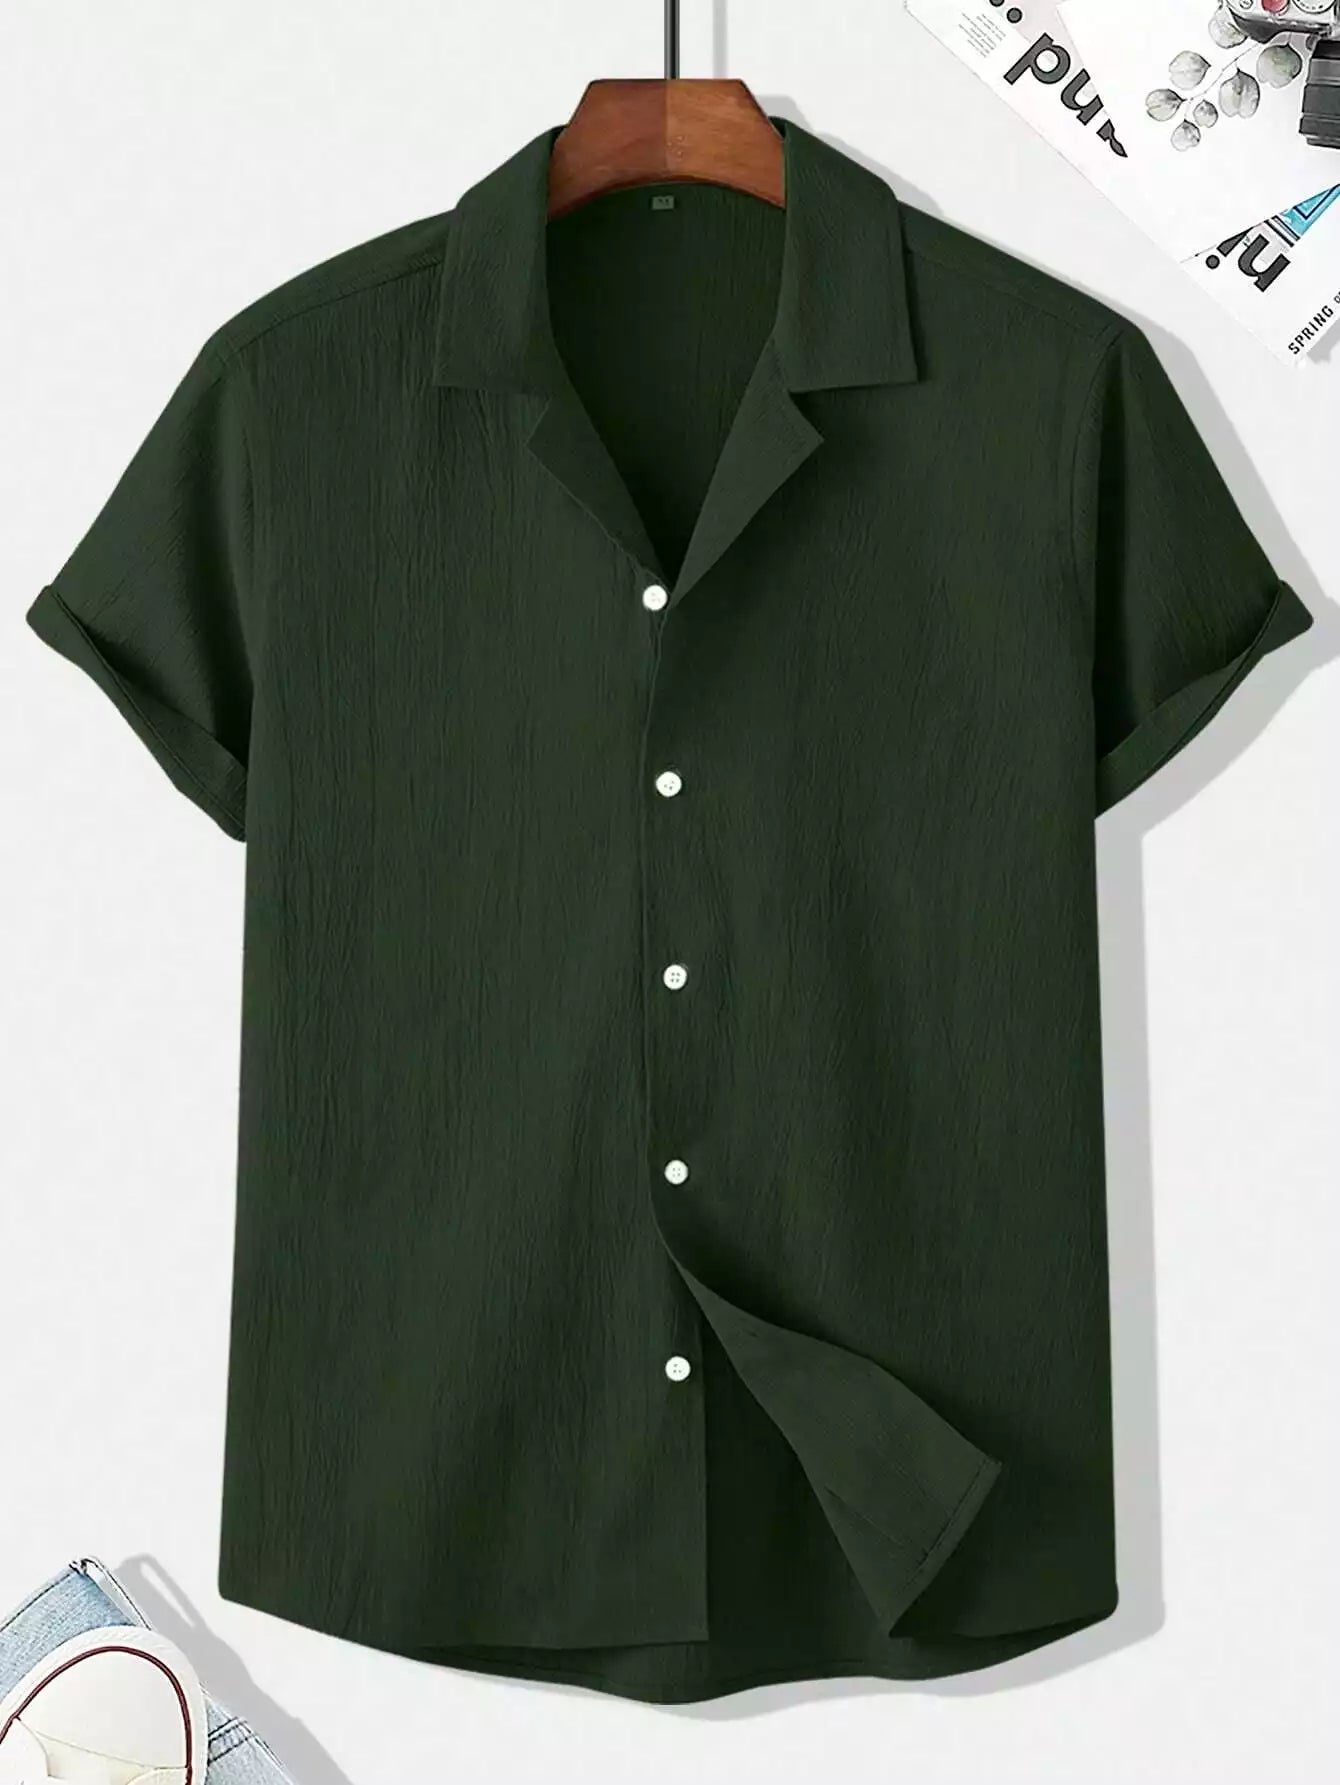 Plain Pattern Dark Green Color Men's Simple  Cotton Casual Shirt Half Sleeve available